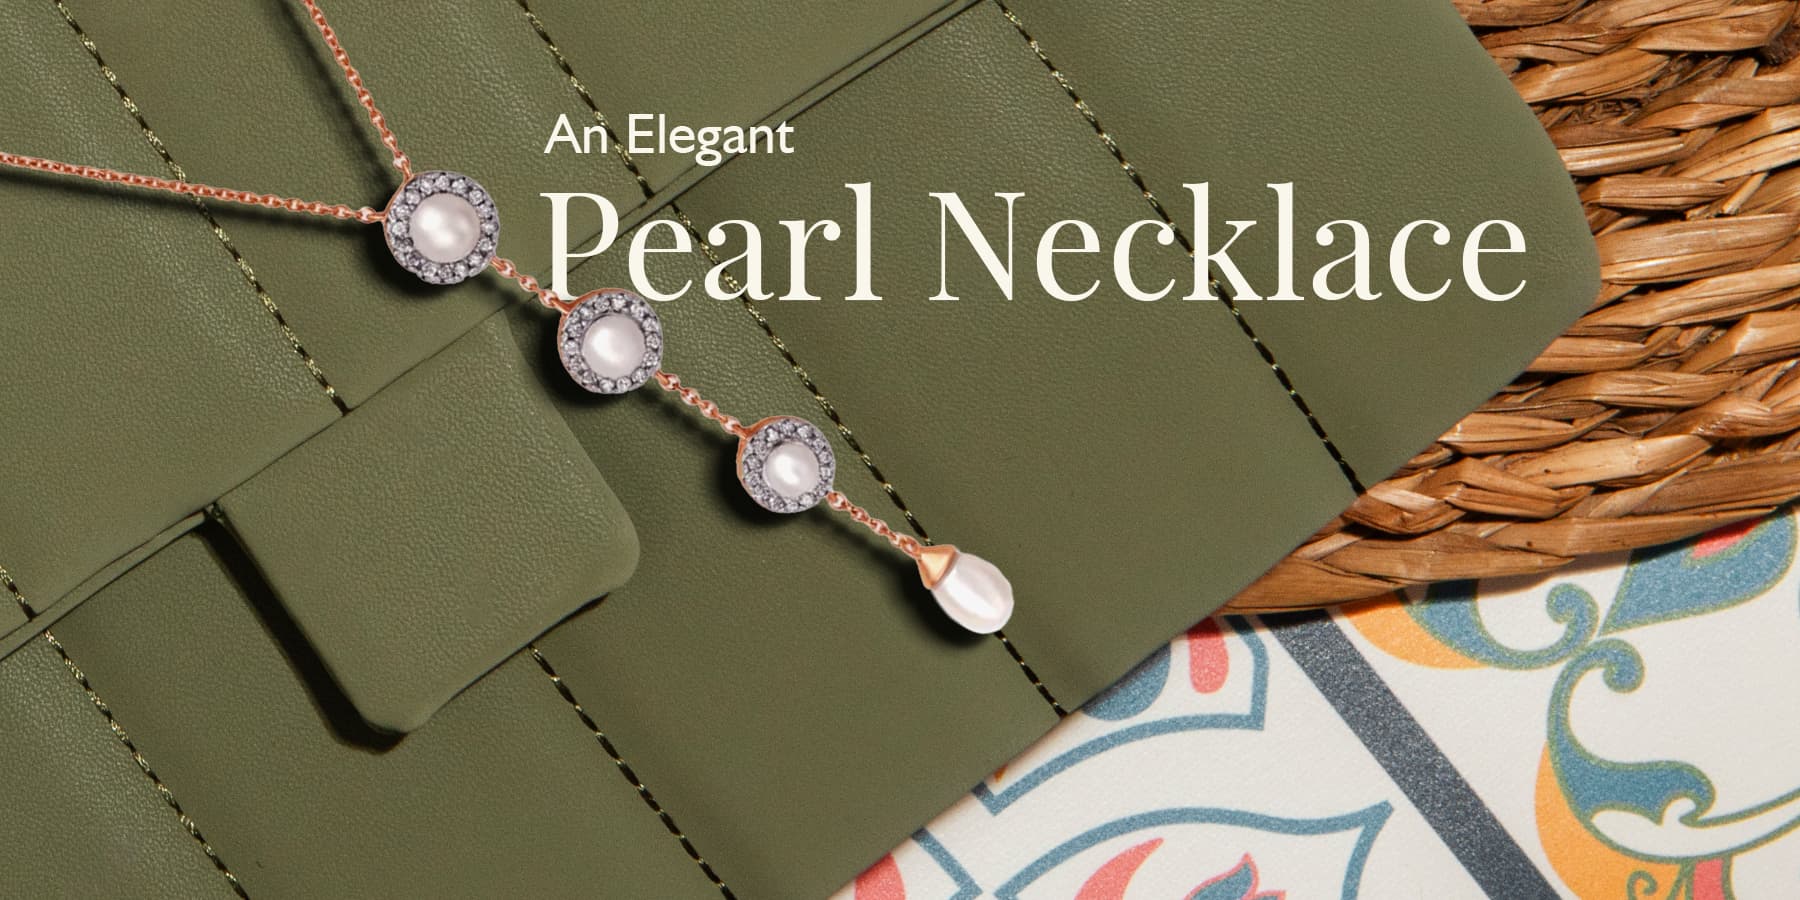 An Elegant Pearl Necklace